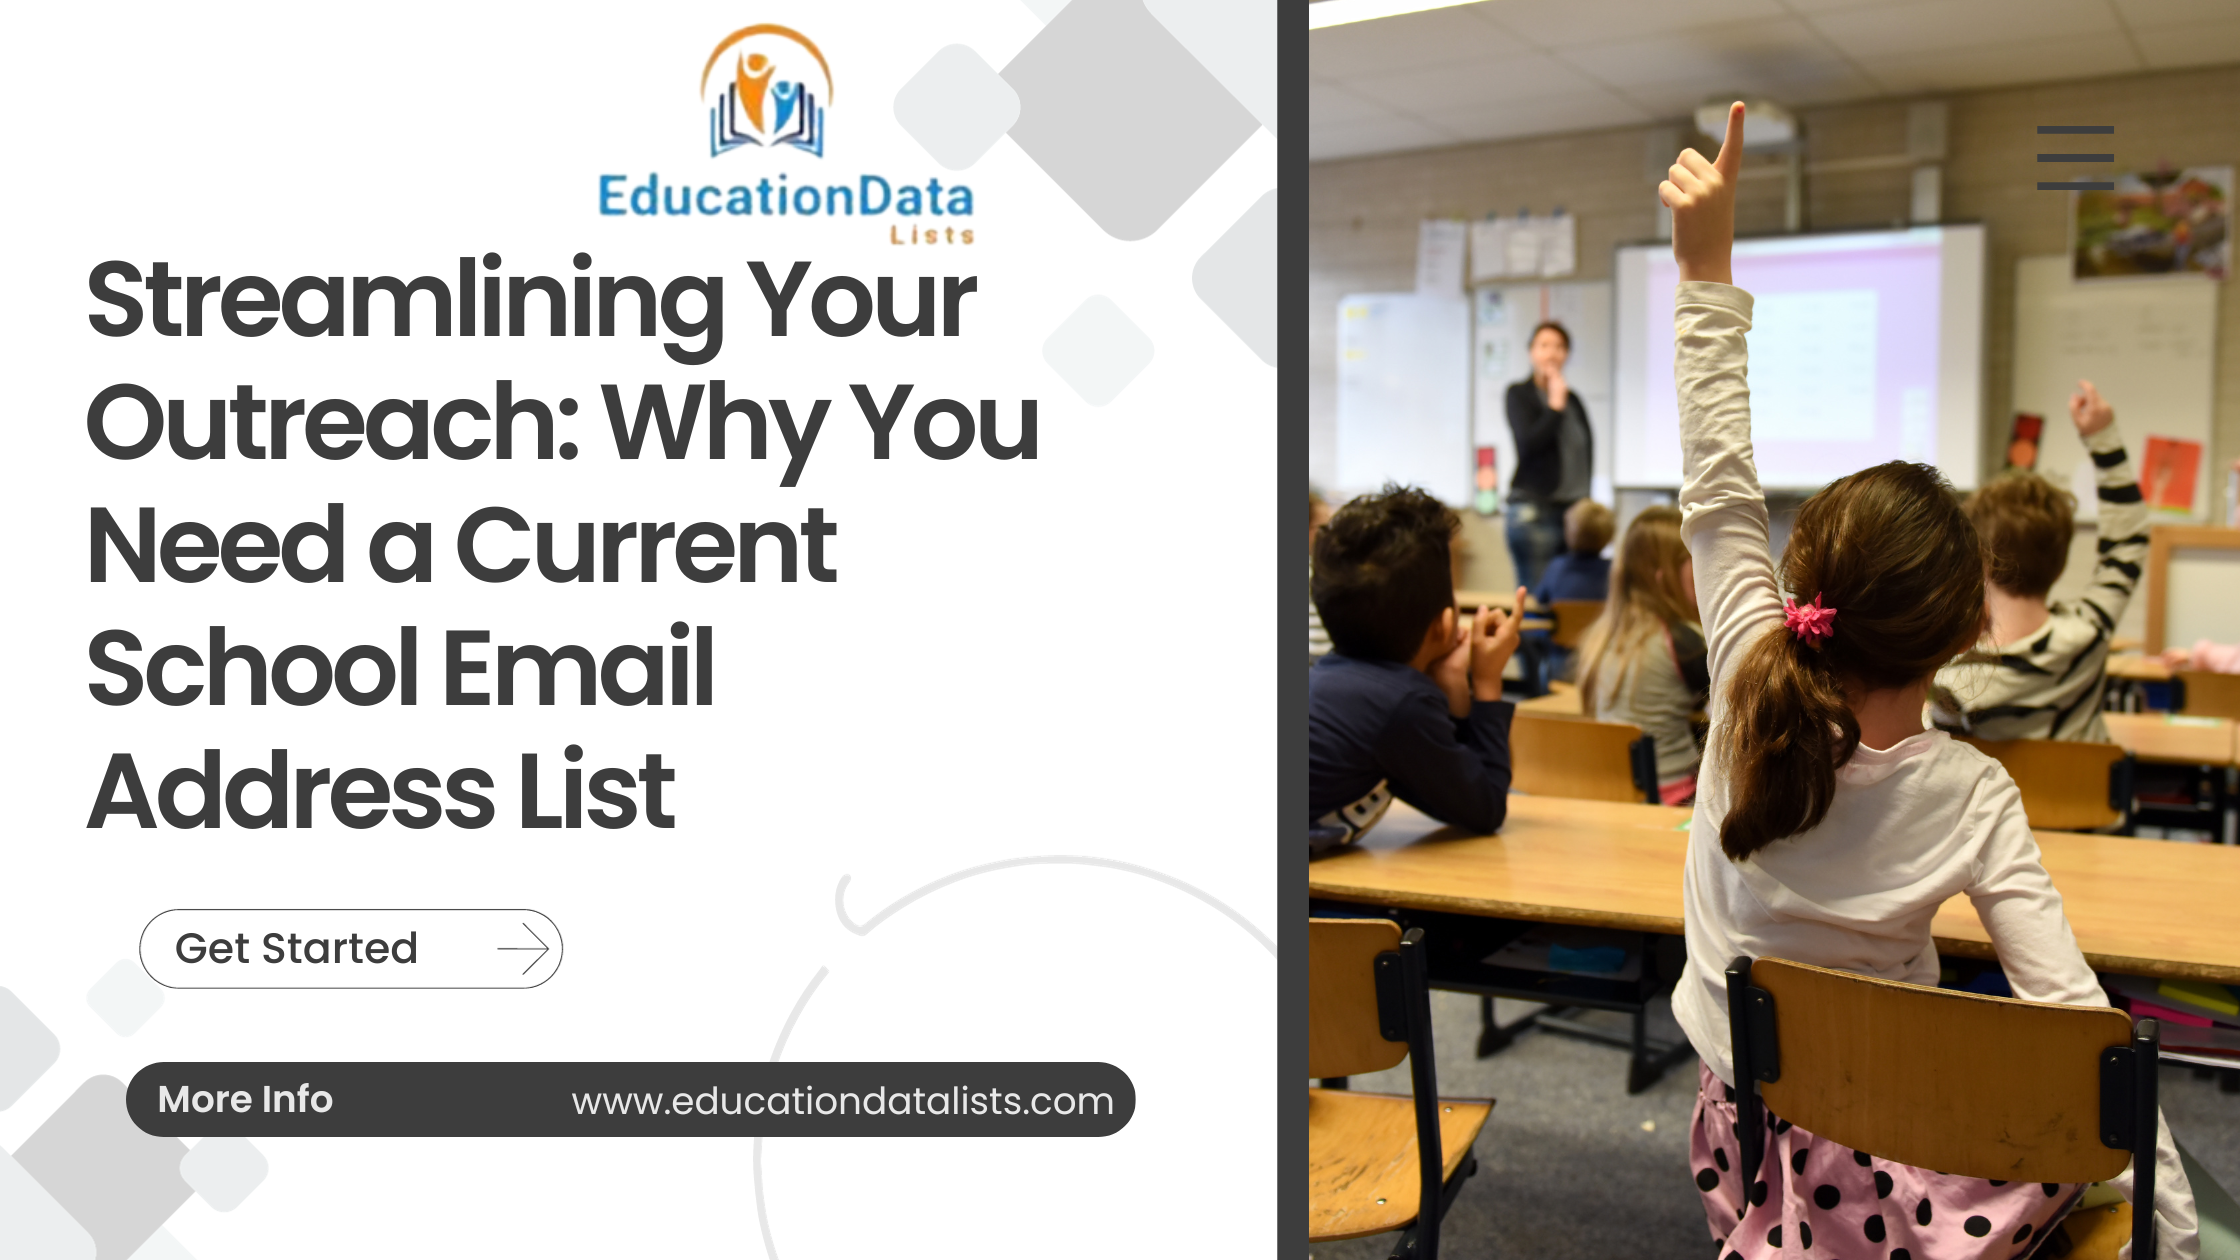 Streamlining Your Outreach: Why You Need a Current School Email Address List